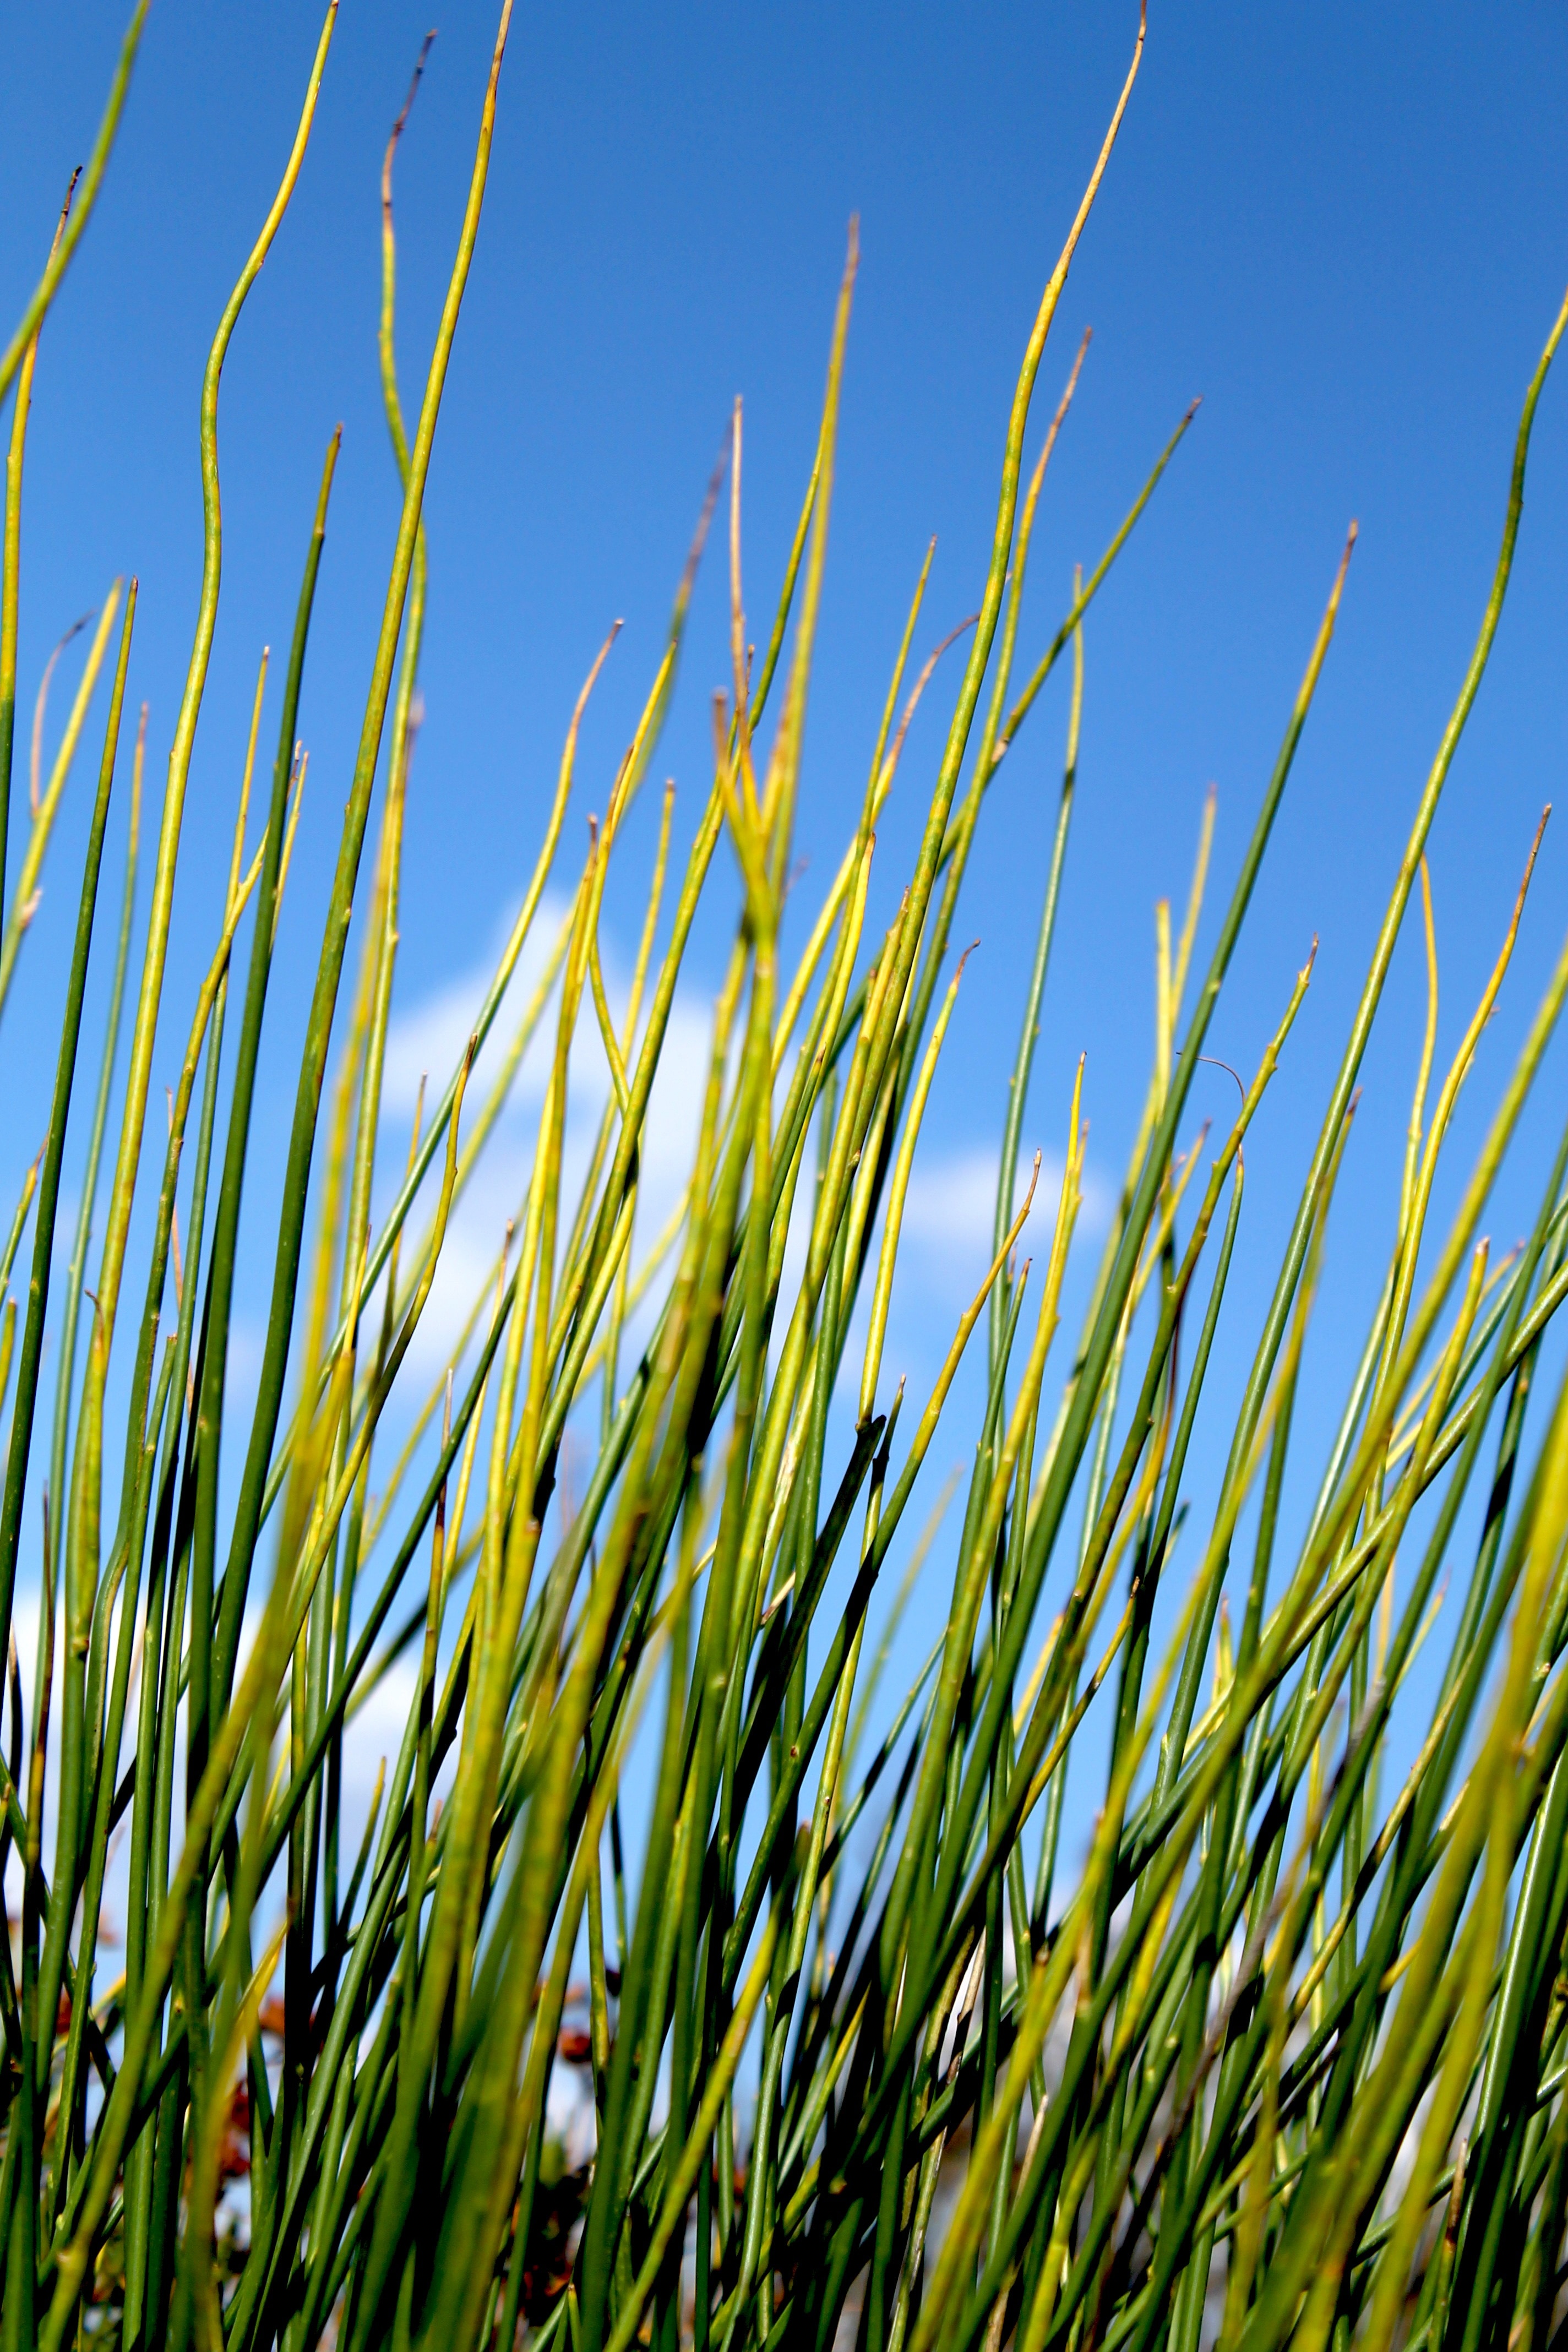 Worm's eye view photography of green outdoor plants under blue sky during daytime